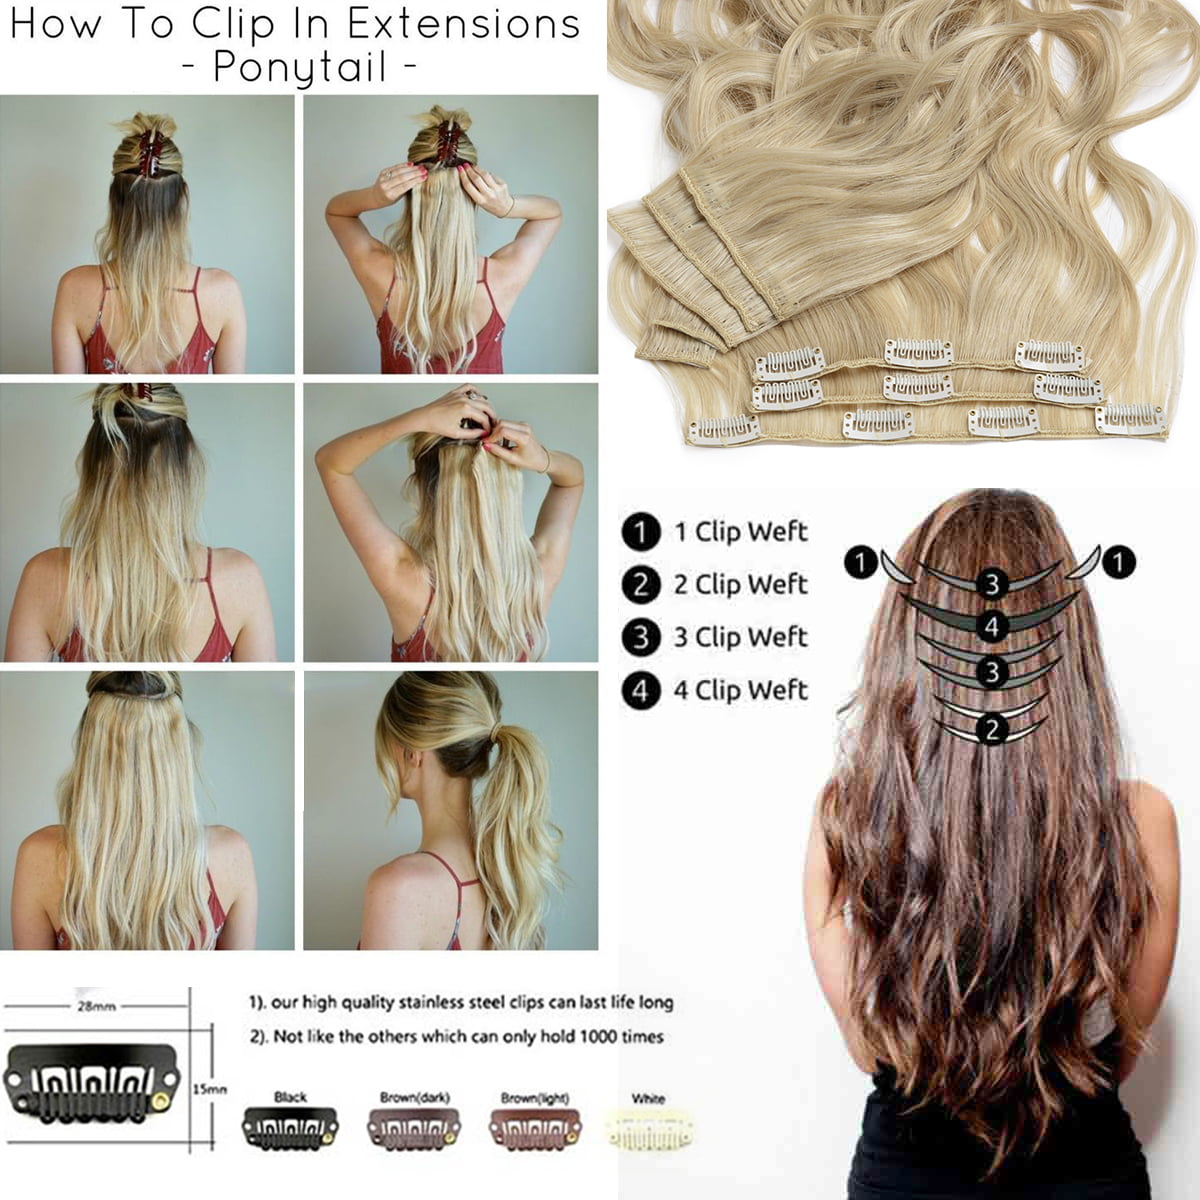 SEGO Clip in Hair Extensions Straight Full Head Real Hair 8 Hair Pieces 18  Clips For Women Hollywood Hair Accessory